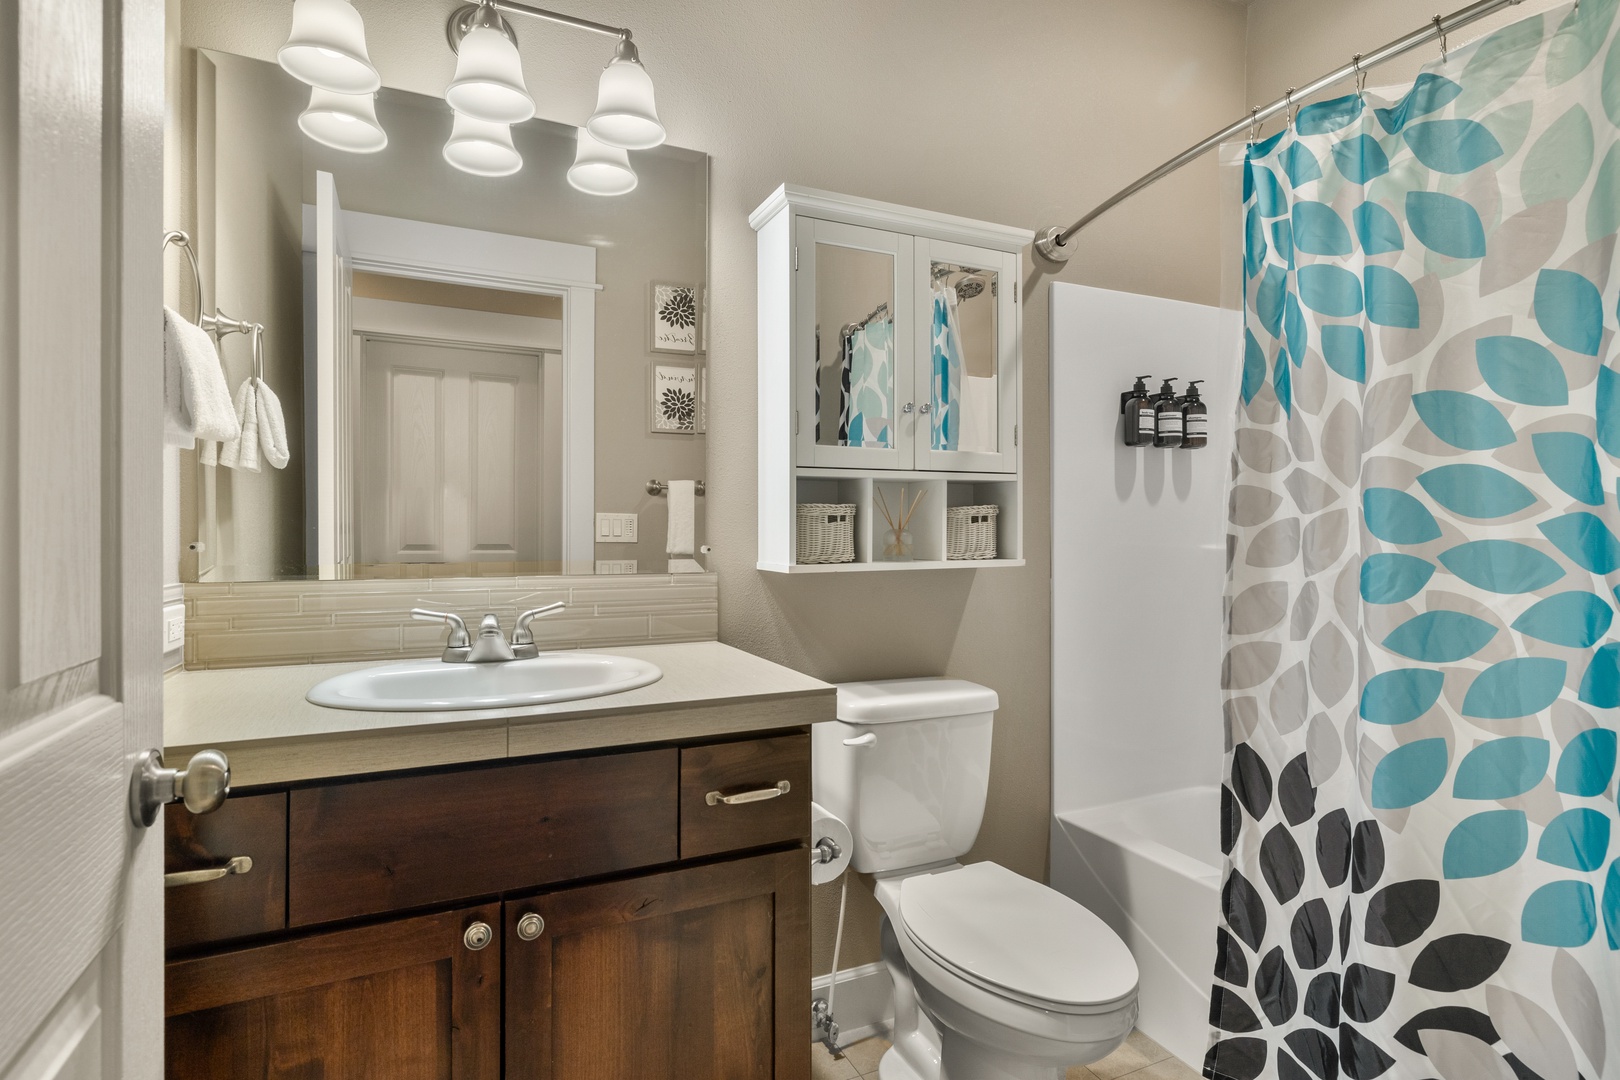 The hall bathroom offers a single vanity & shower/tub combo